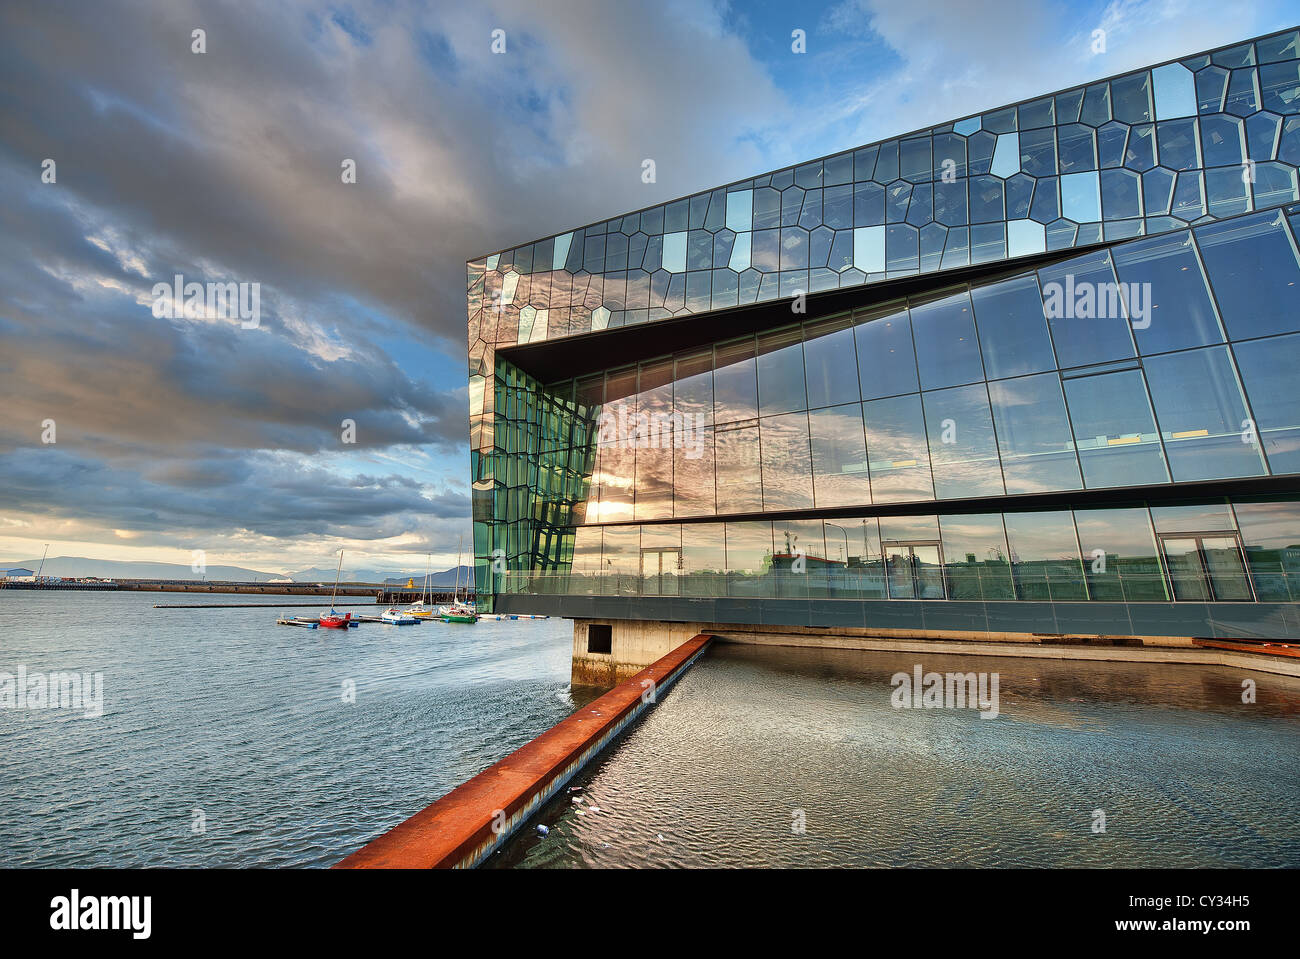 A view of the Harpa concert hall on the waterfront in Reykjavik, Iceland  Stock Photo - Alamy